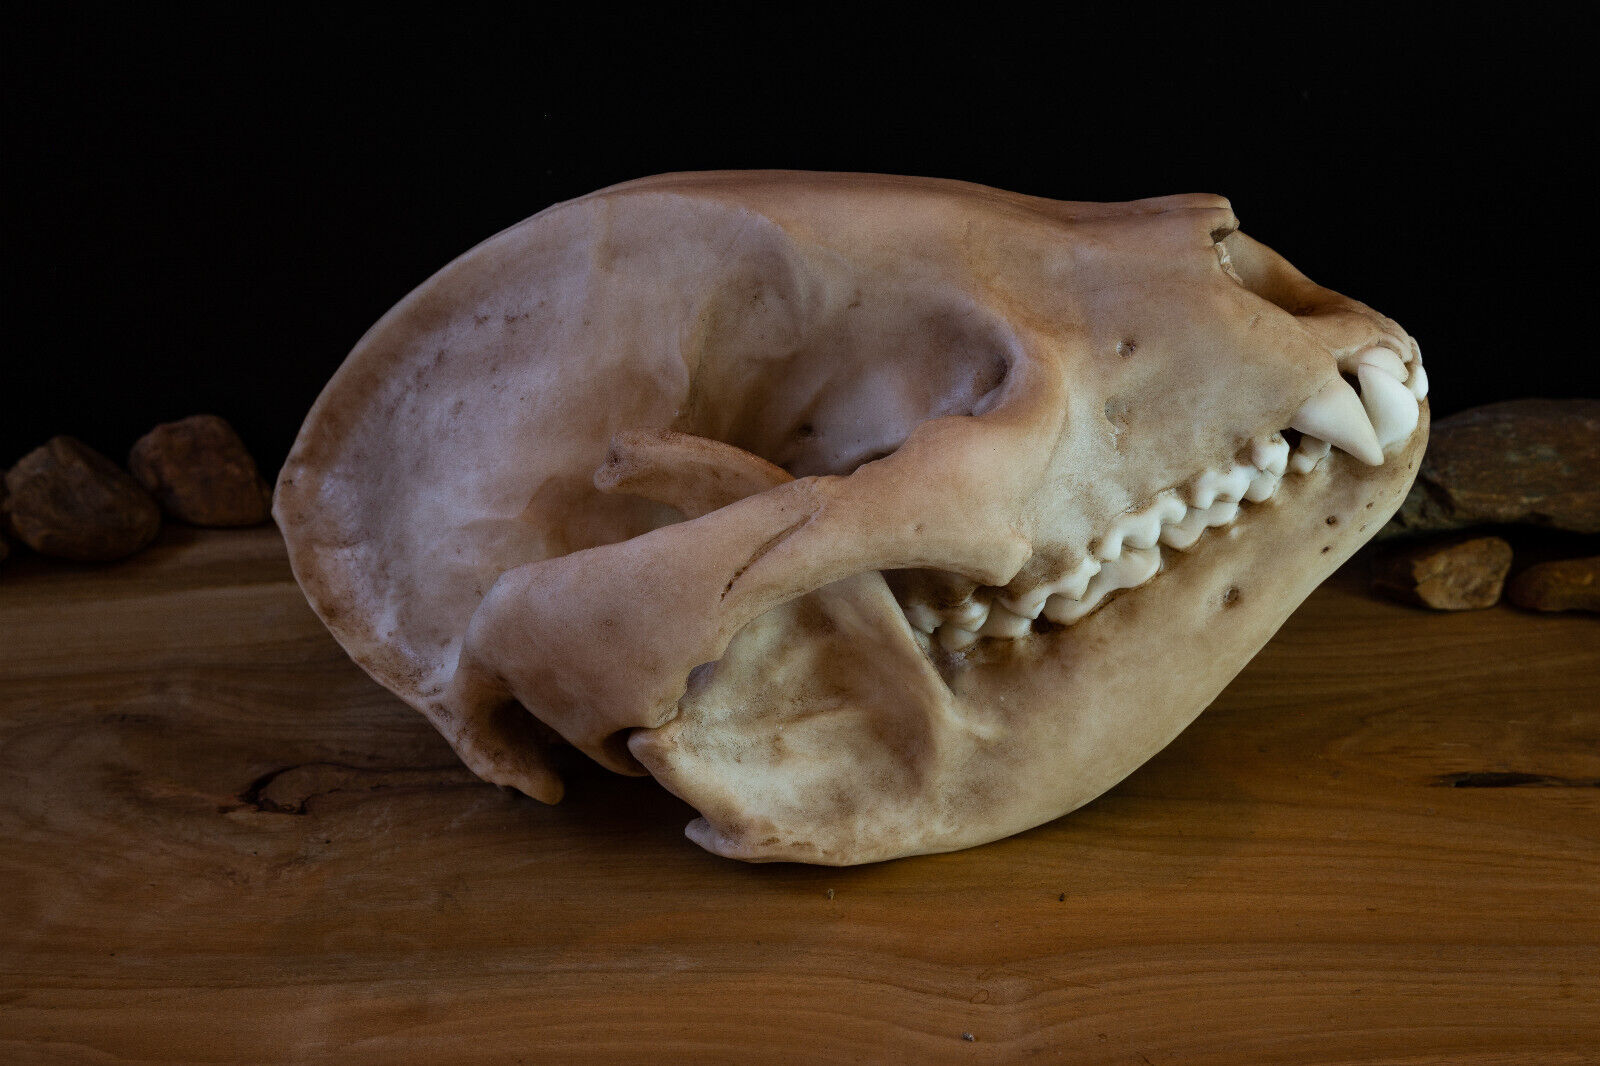 Giant Panda Skull - Adolescent - large Quality Replica -FREE world wide shipping